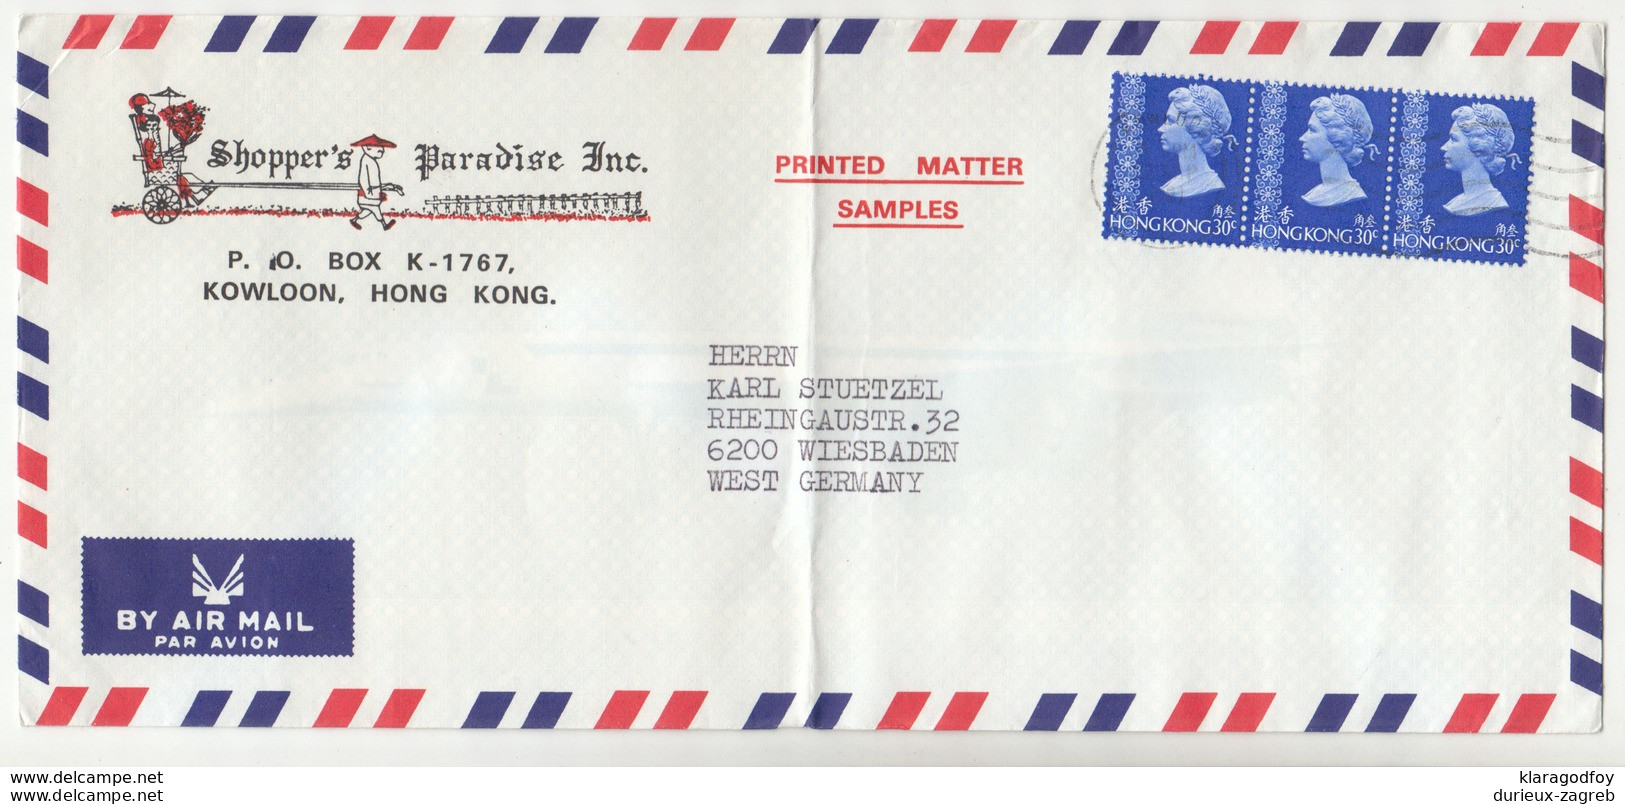 Shopper's Paradise Inc. 4 Company Air Mail Letter Covers Posted To 1980? Germany B200210 - Covers & Documents